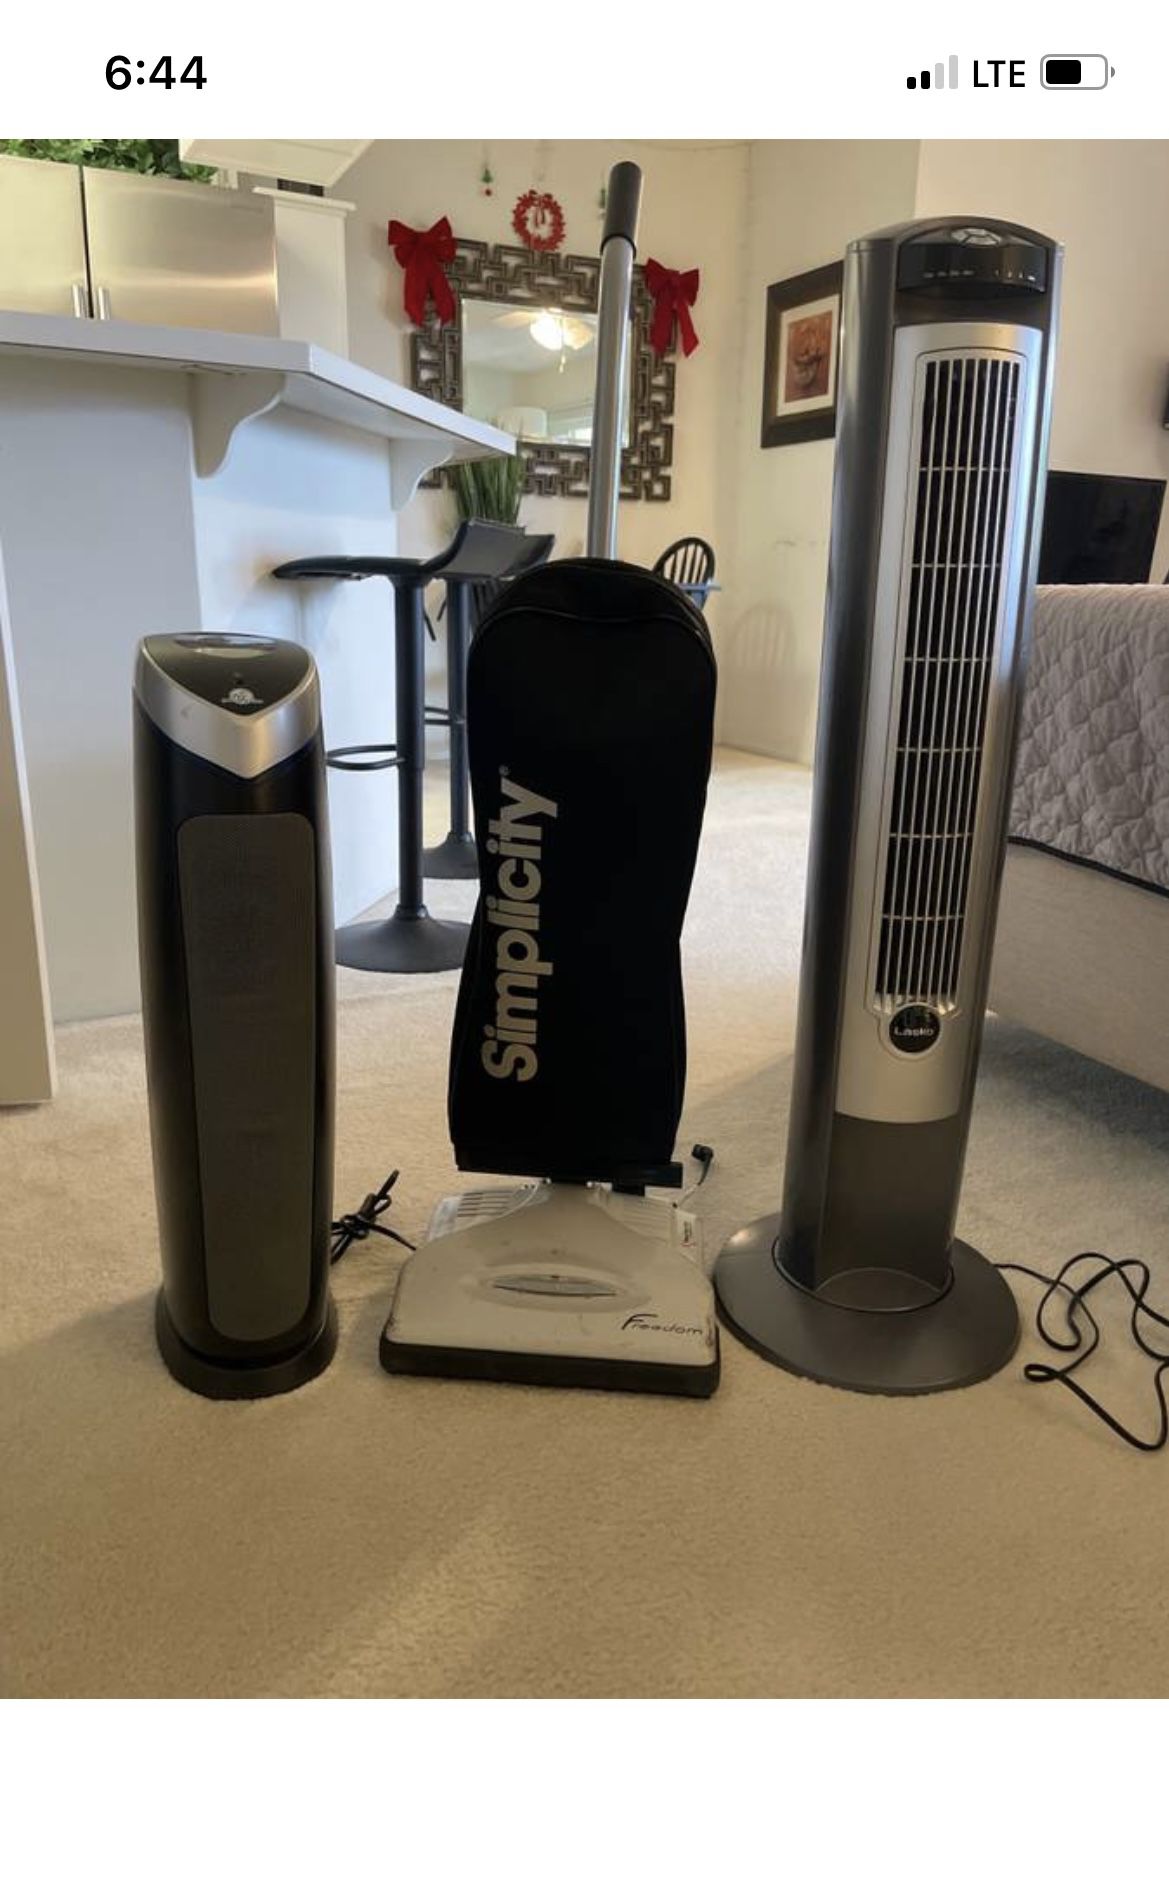 1- Germgaurdian air purifier 5 speed with timer and UV $20.   2- Simplicity vacuum cleaner $25